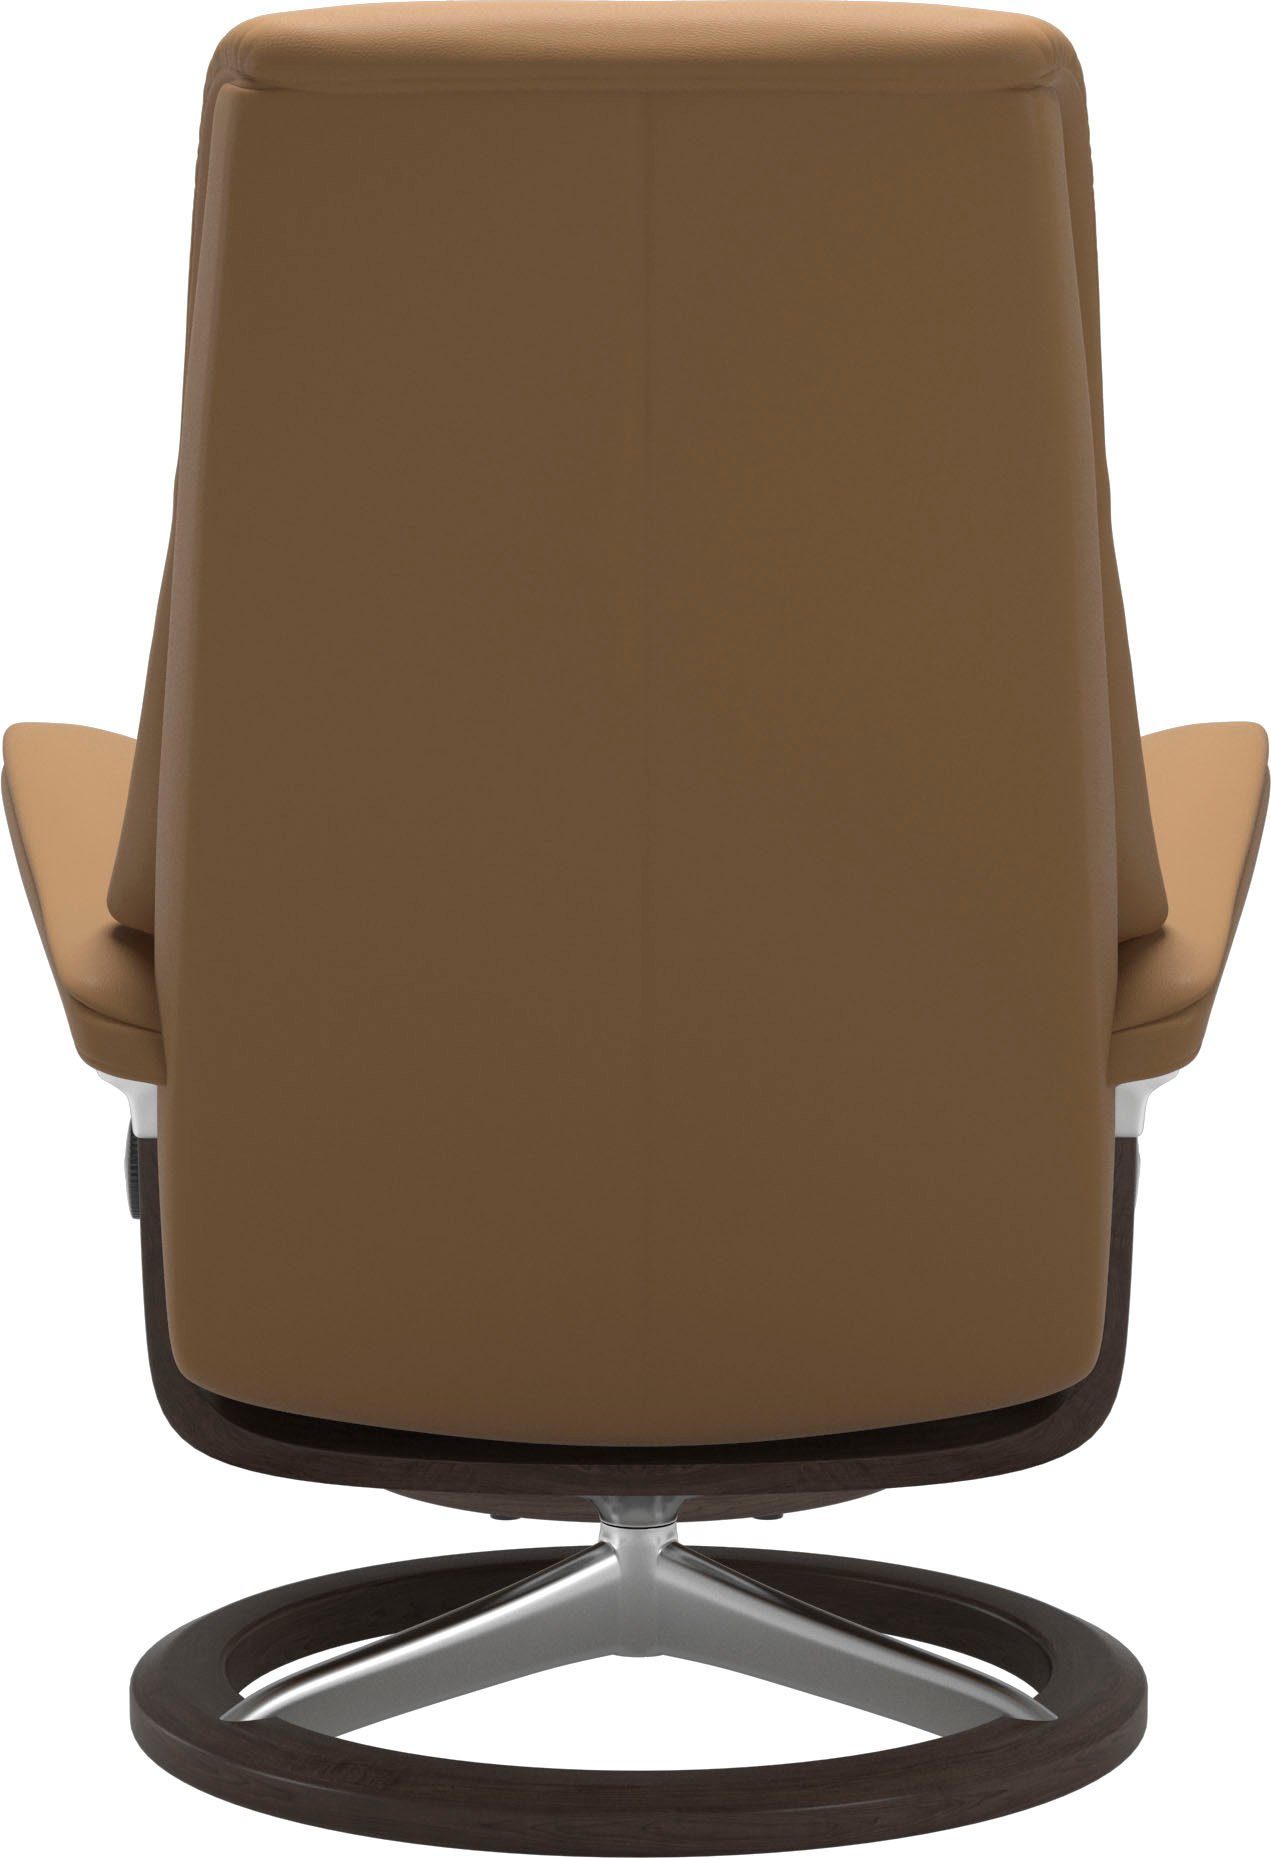 Signature Wenge mit View, Relaxsessel Größe Base, Stressless® L,Gestell